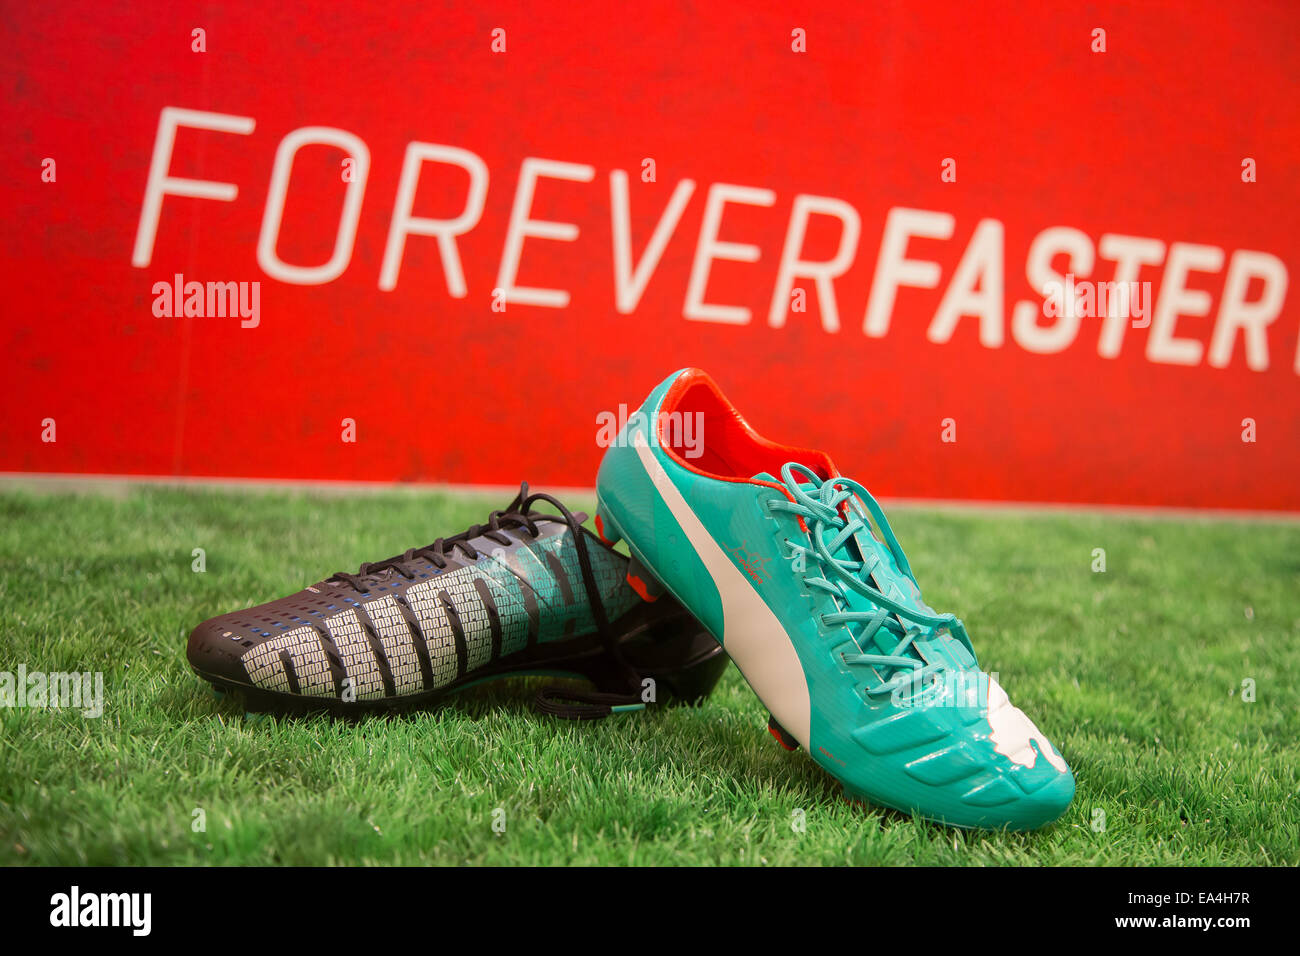 PUMA football boot evoSPEED (l.) and evoPOWER lying on the grass with  Forever Faster slogan in the background. COMMERCIAL HANDOUT/EDITORIAL USE  ONLY/NO SALES. Please quote the source "photo: PUMA/Ralf Roedel Stock Photo  -